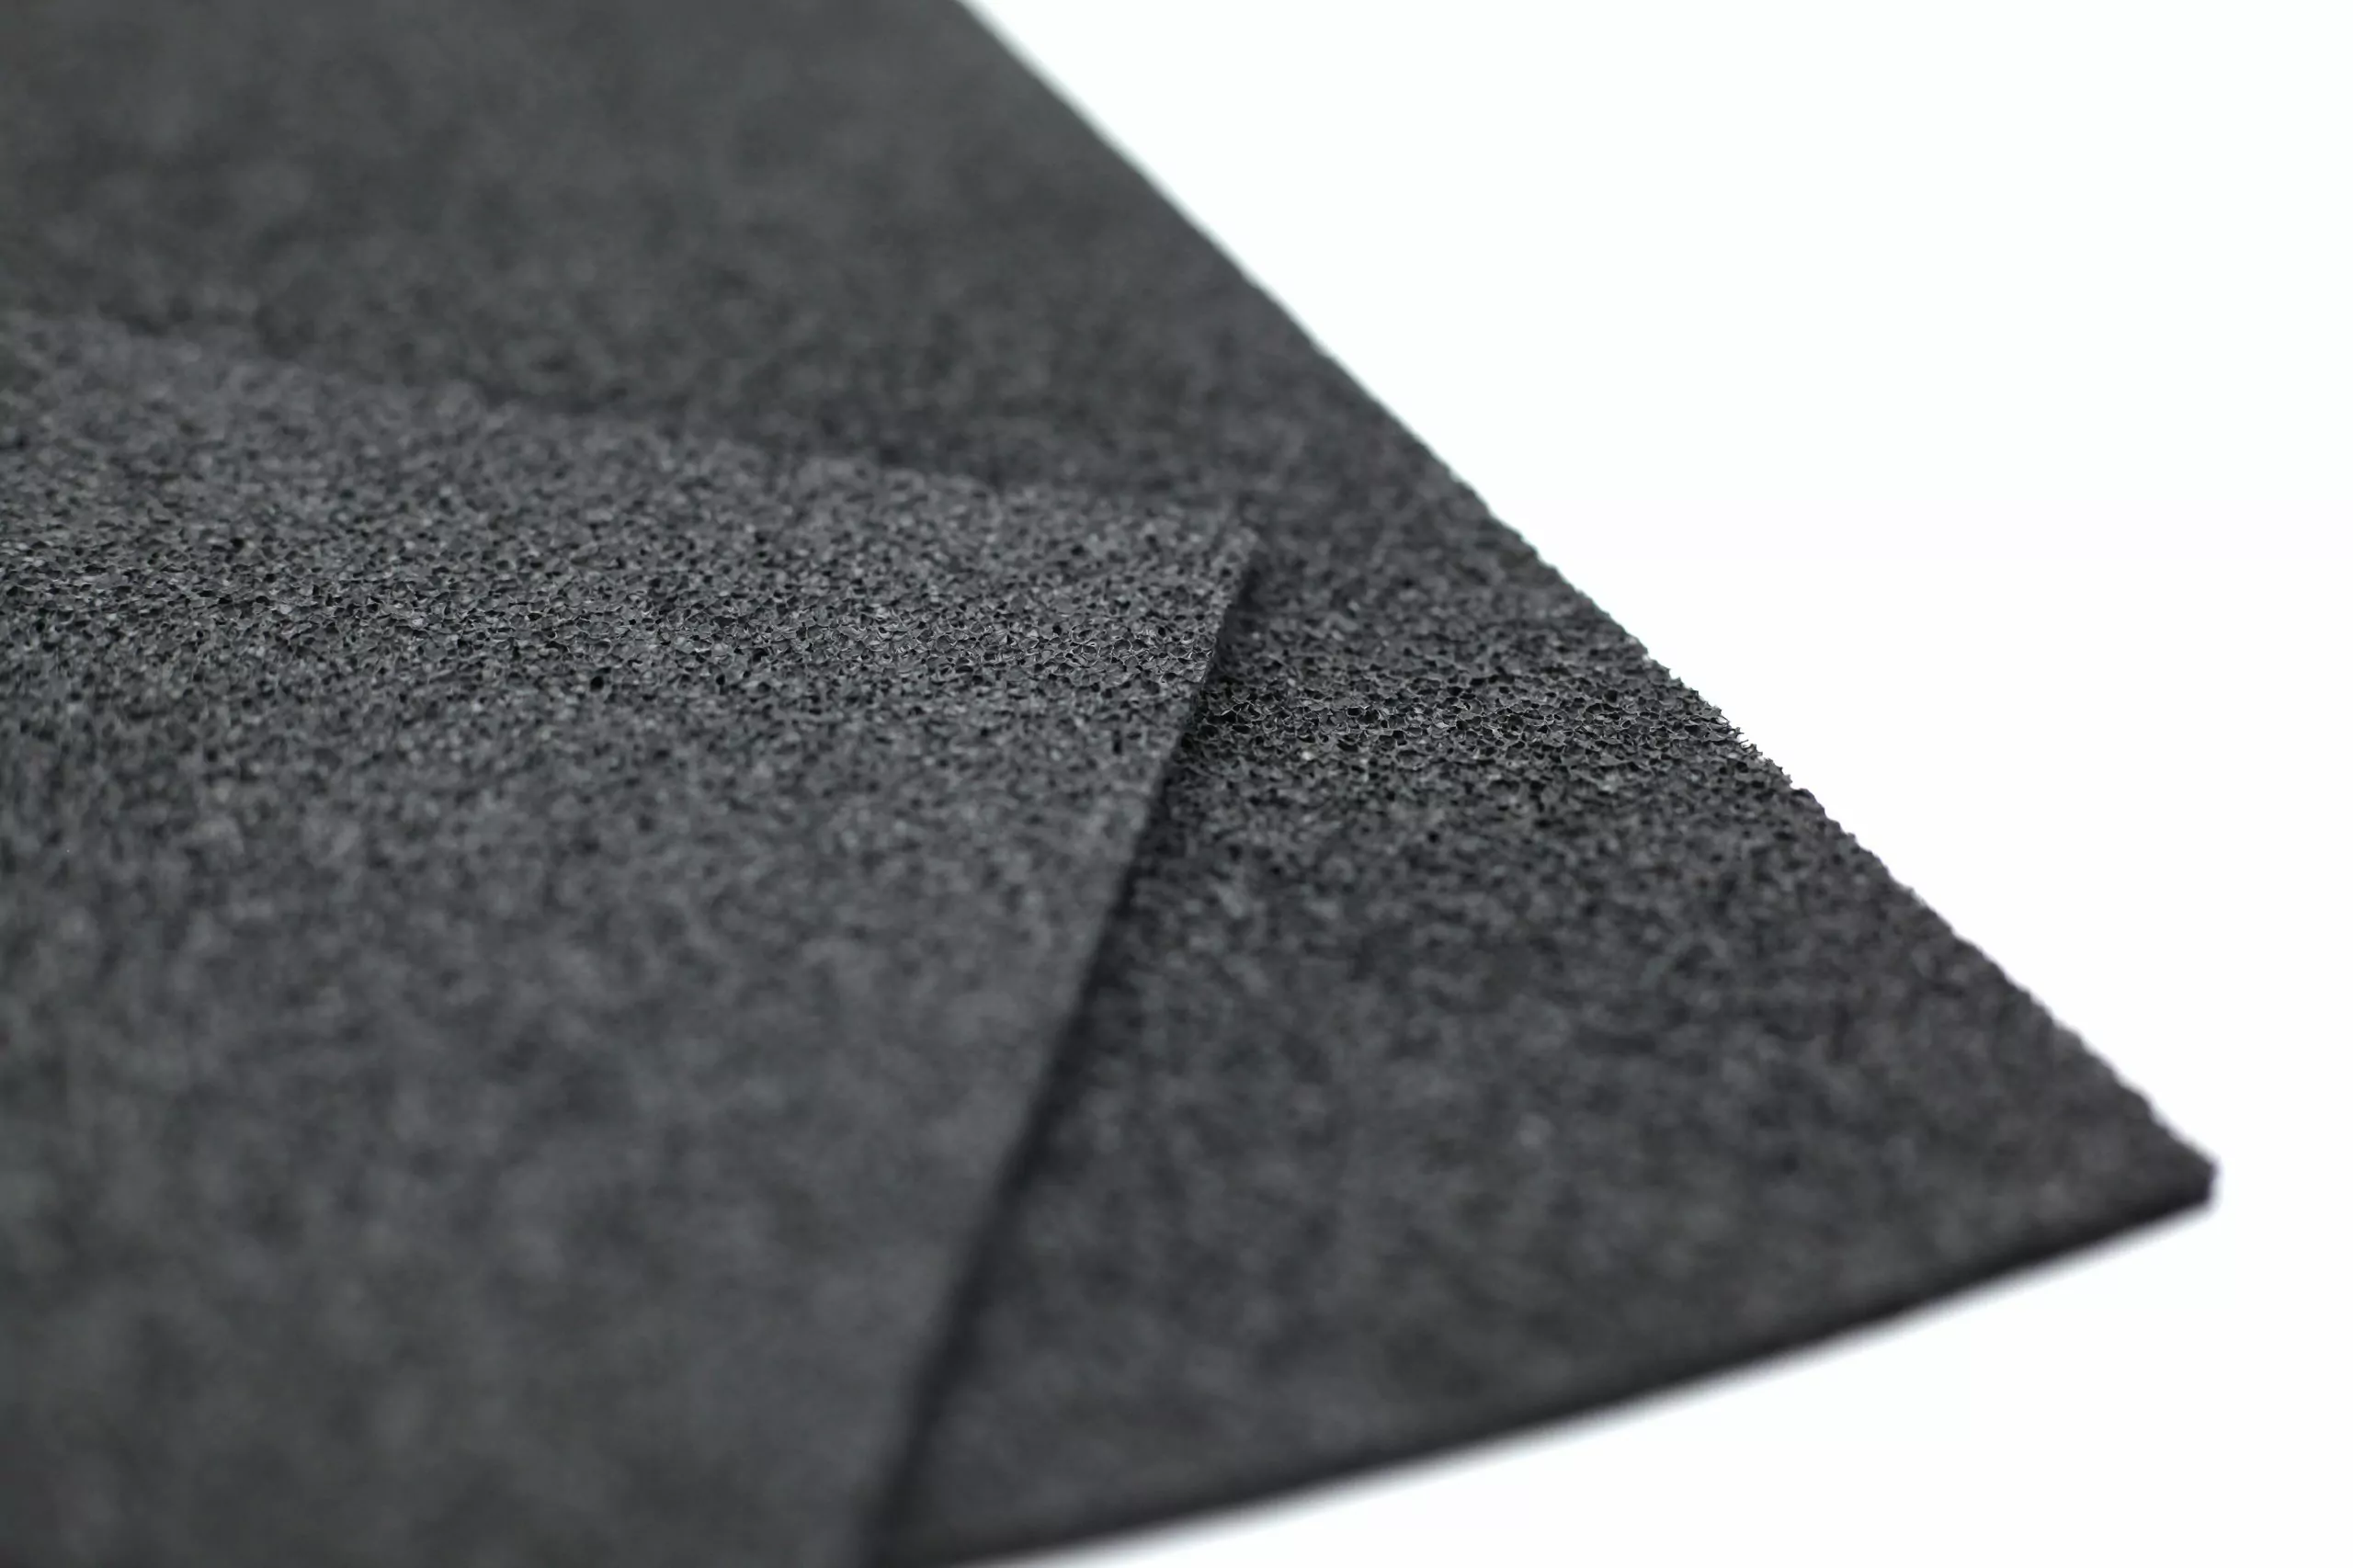 ECOCELL® batts, ECOCELL by Cellulose Material Solutions, LLC